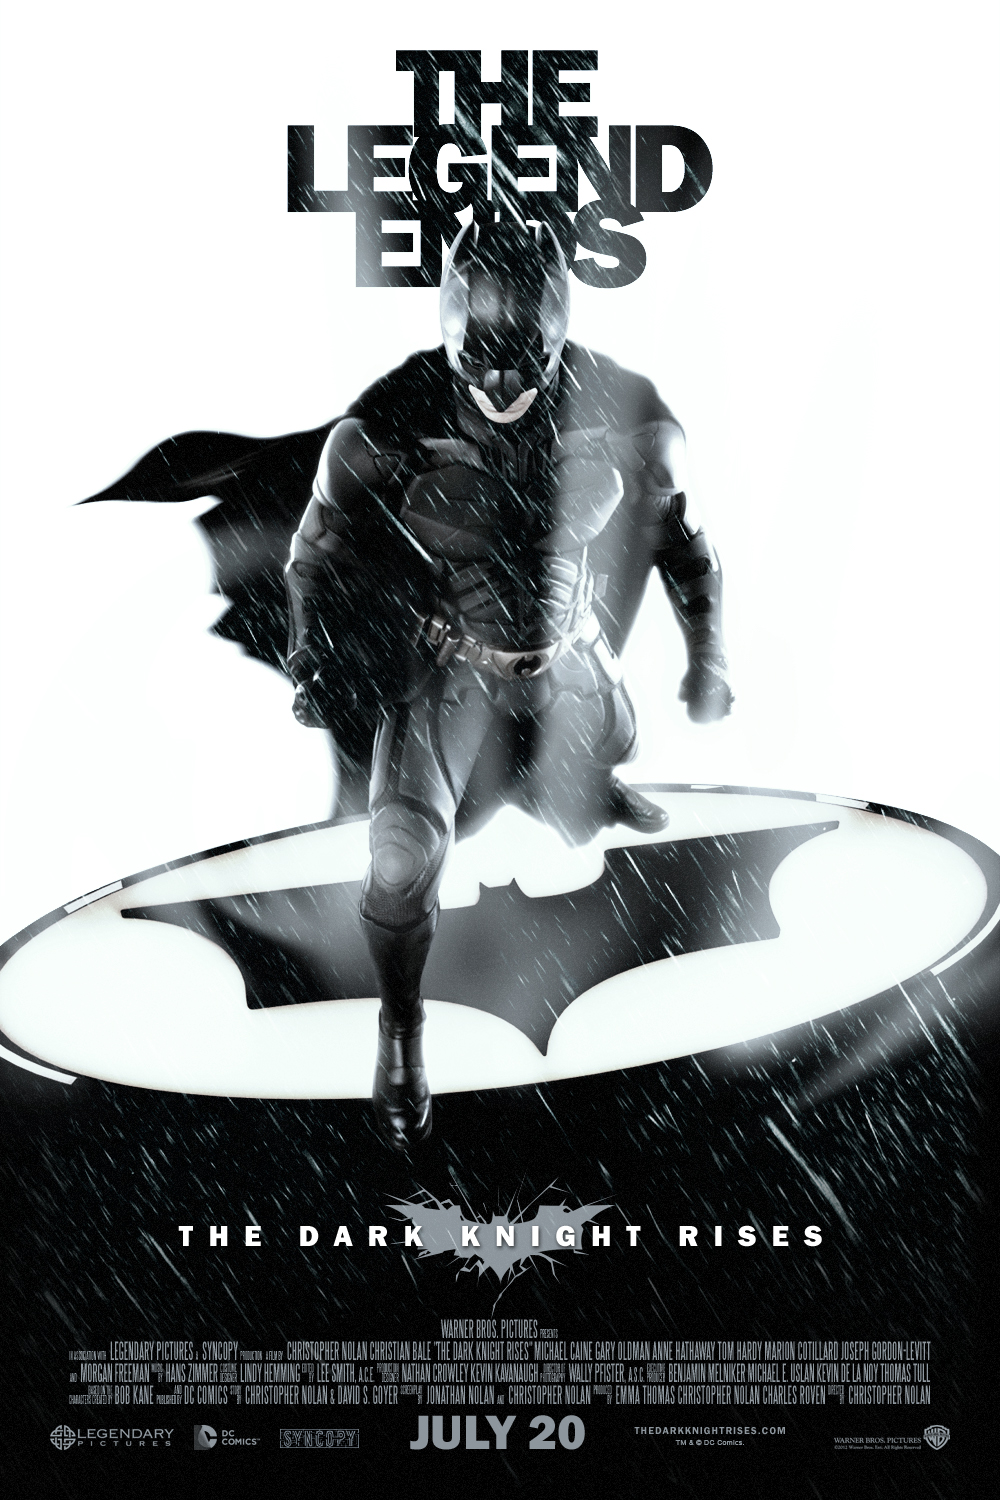 The Dark Knight Rises Theatrical Poster by J-K-K-S on DeviantArt